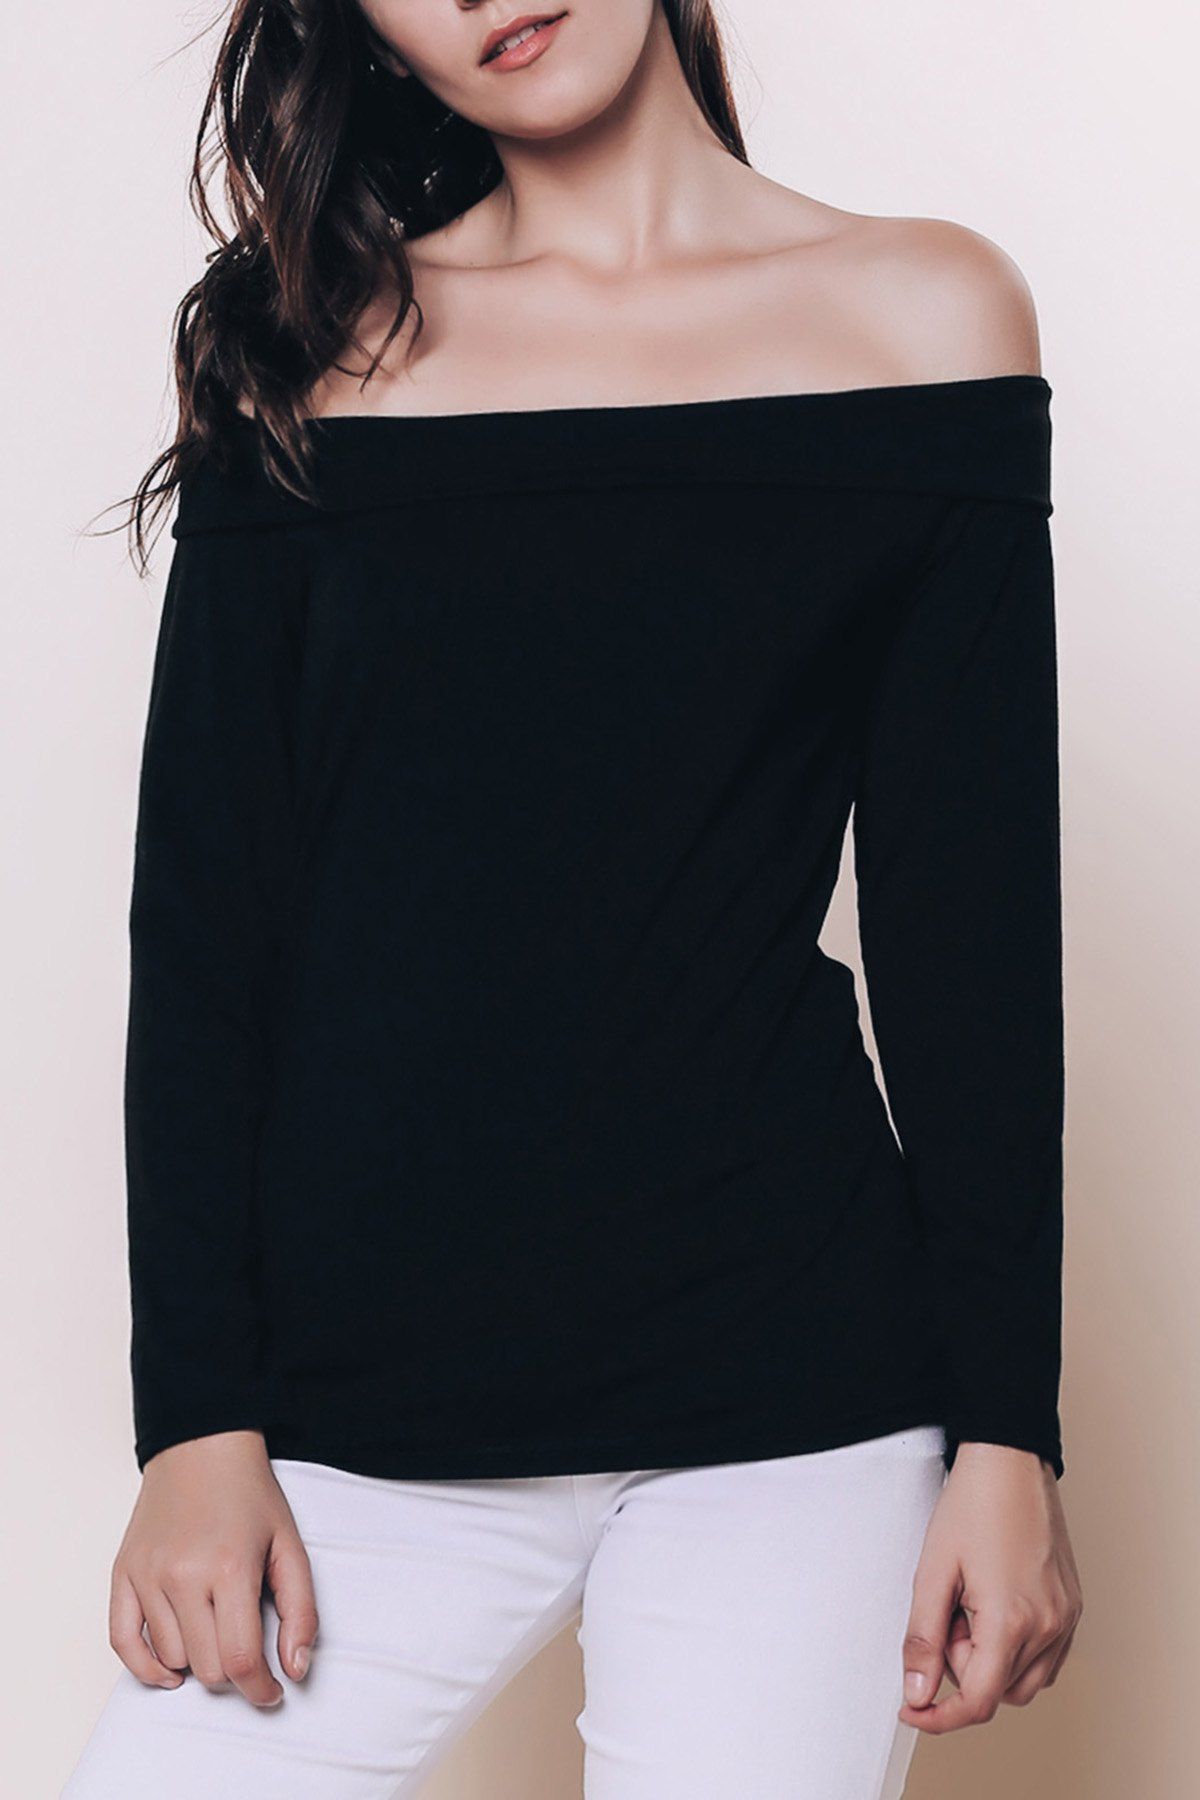 Sexy Black Off The Shoulder Long Sleeve T-Shirt For Women, BLACK, S in ...